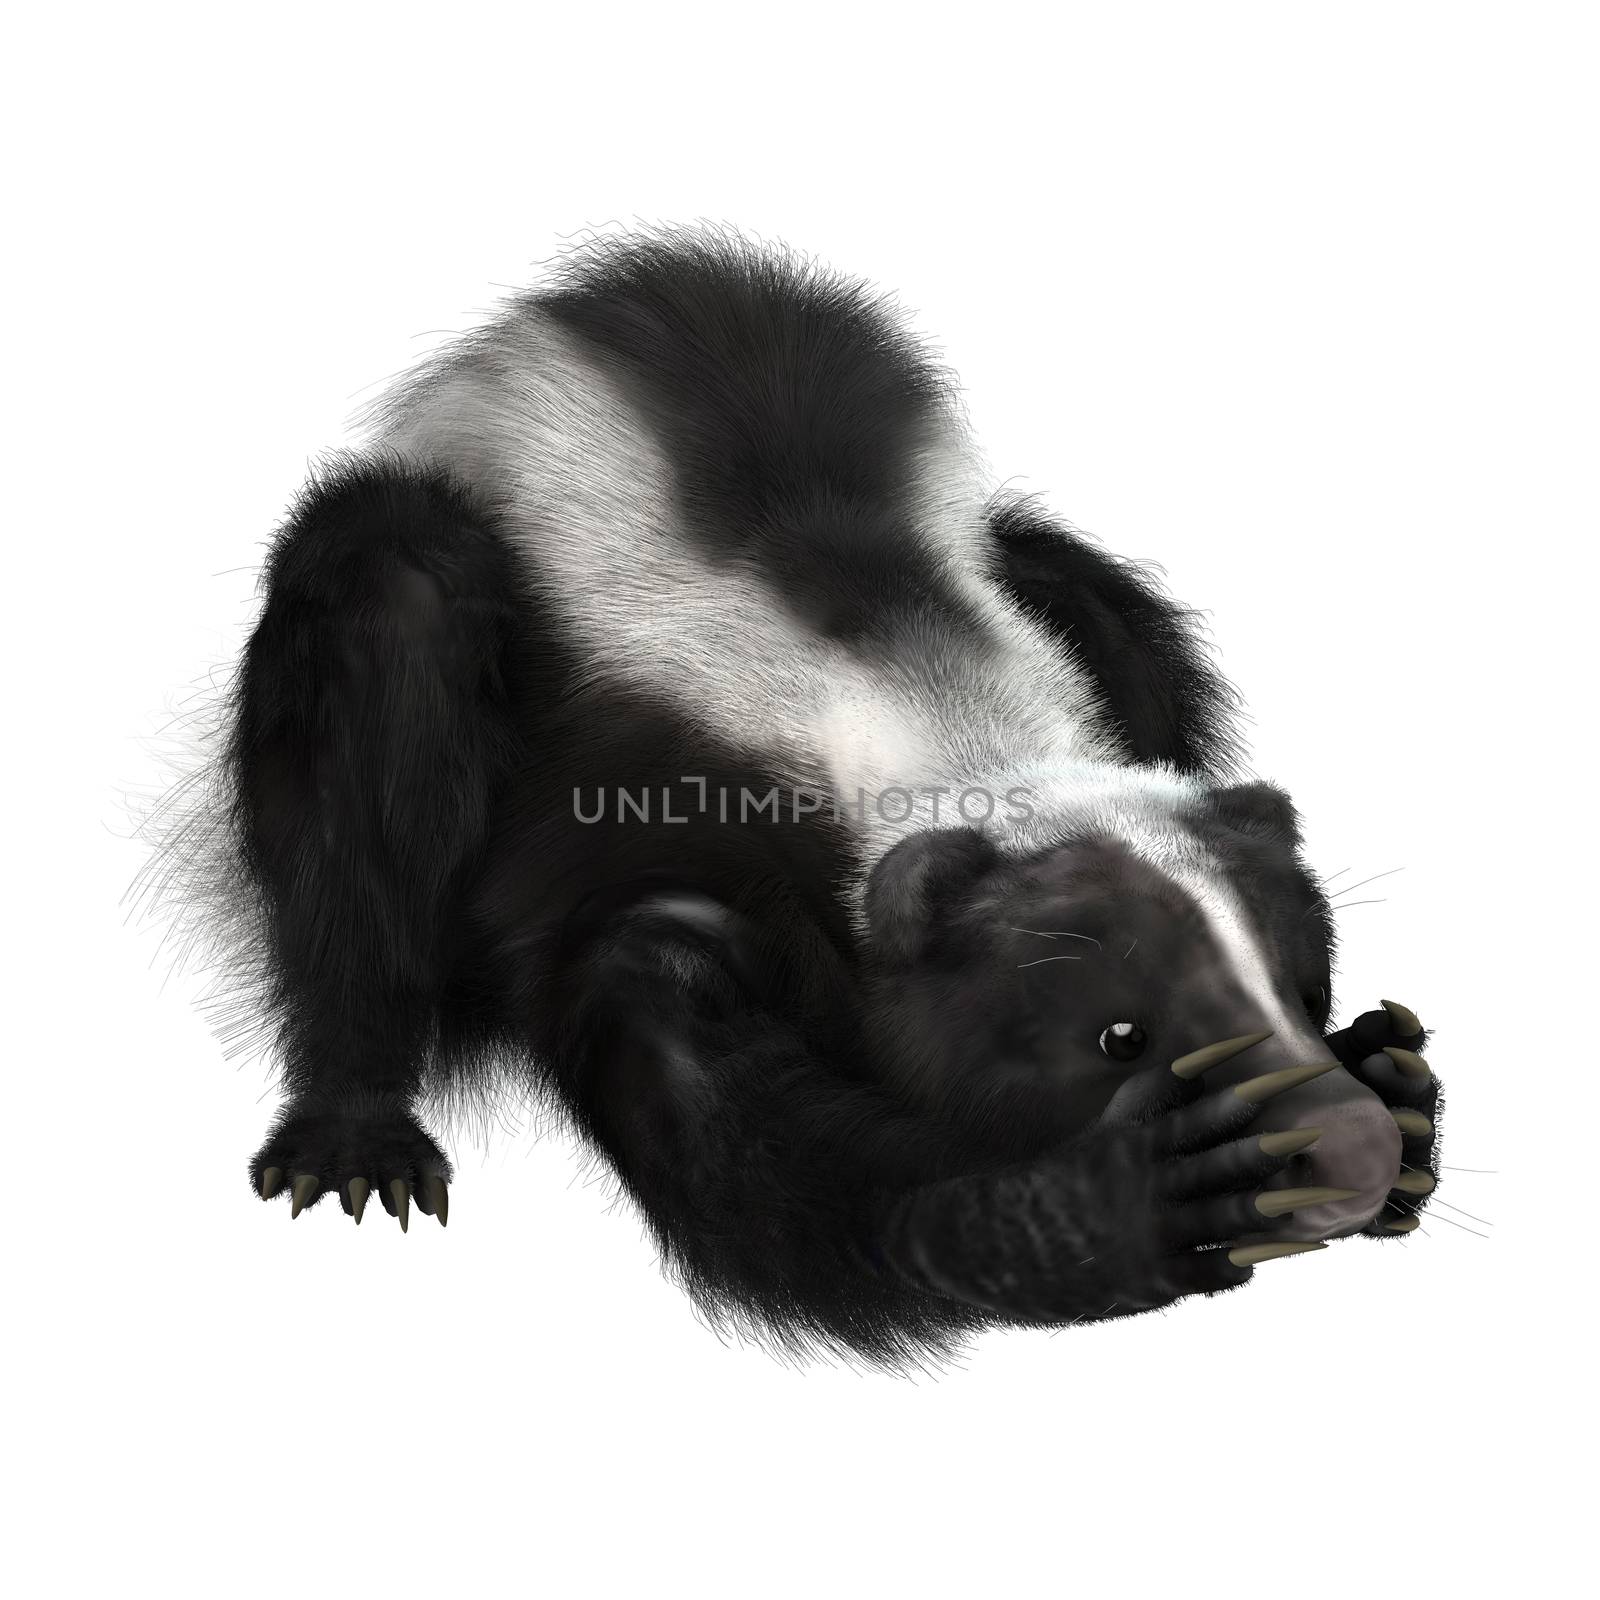 3D digital render of a funny skunk isolated on white background